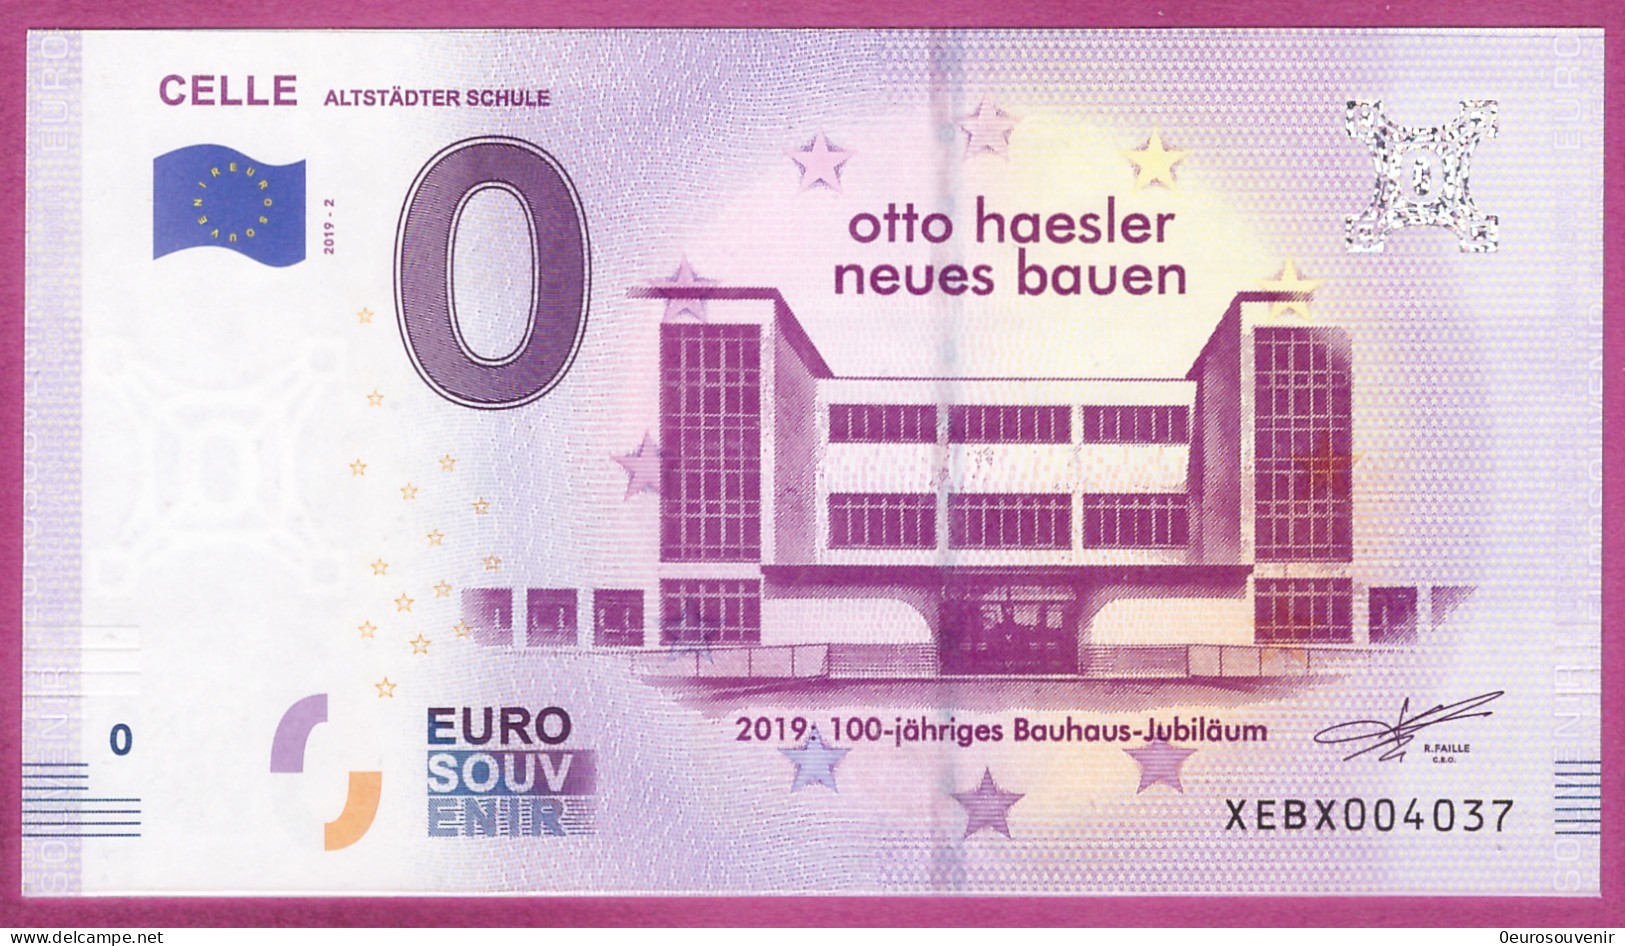 0-Euro XEBX 2019-2 CELLE - ALTSTÄDTER SCHULE - Private Proofs / Unofficial